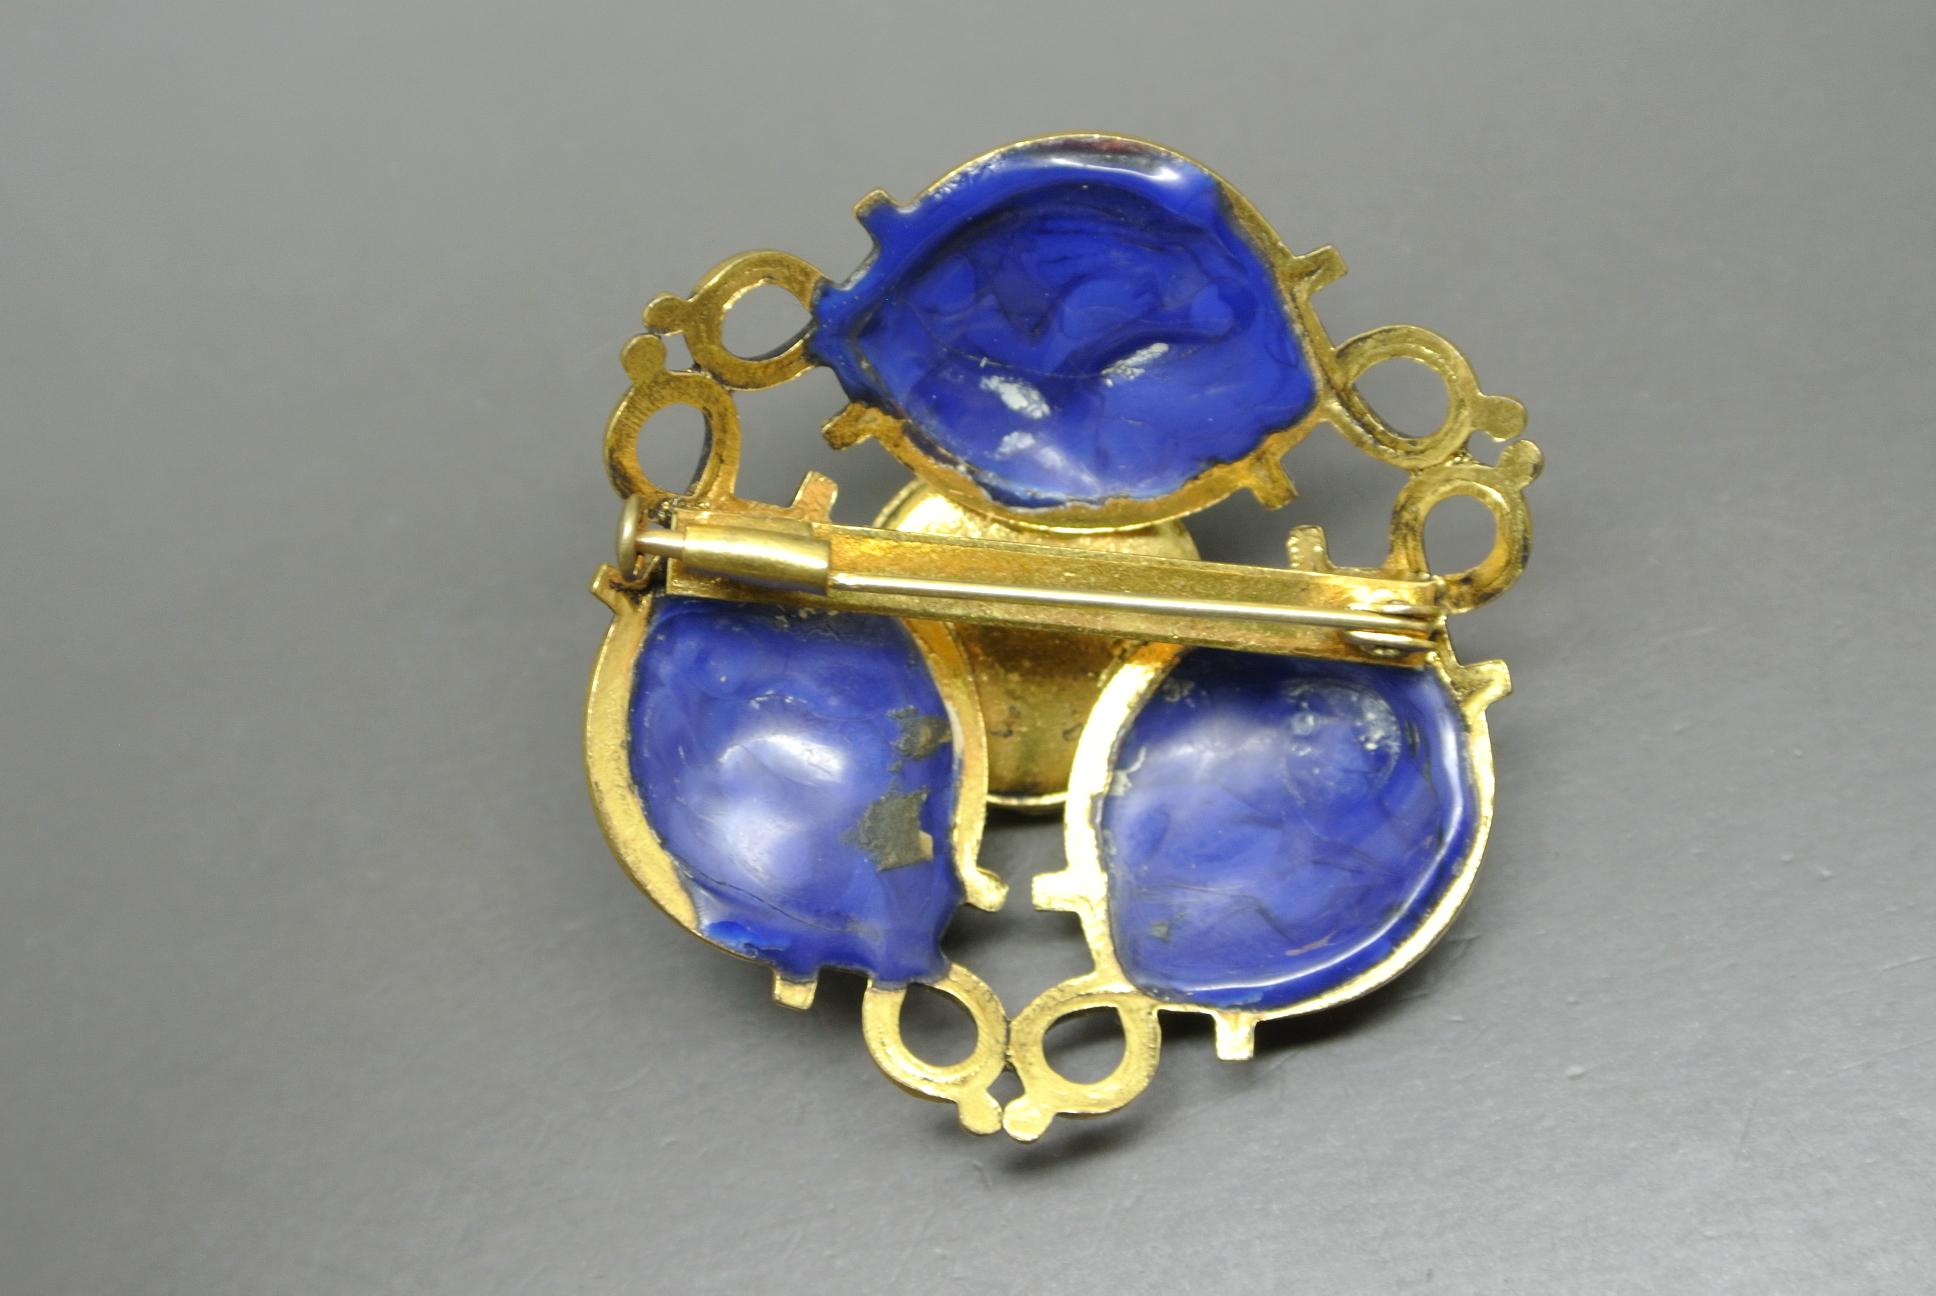 French brooch
Made by Gripoix workshop in paris
Very stylish one
Dated 1950s